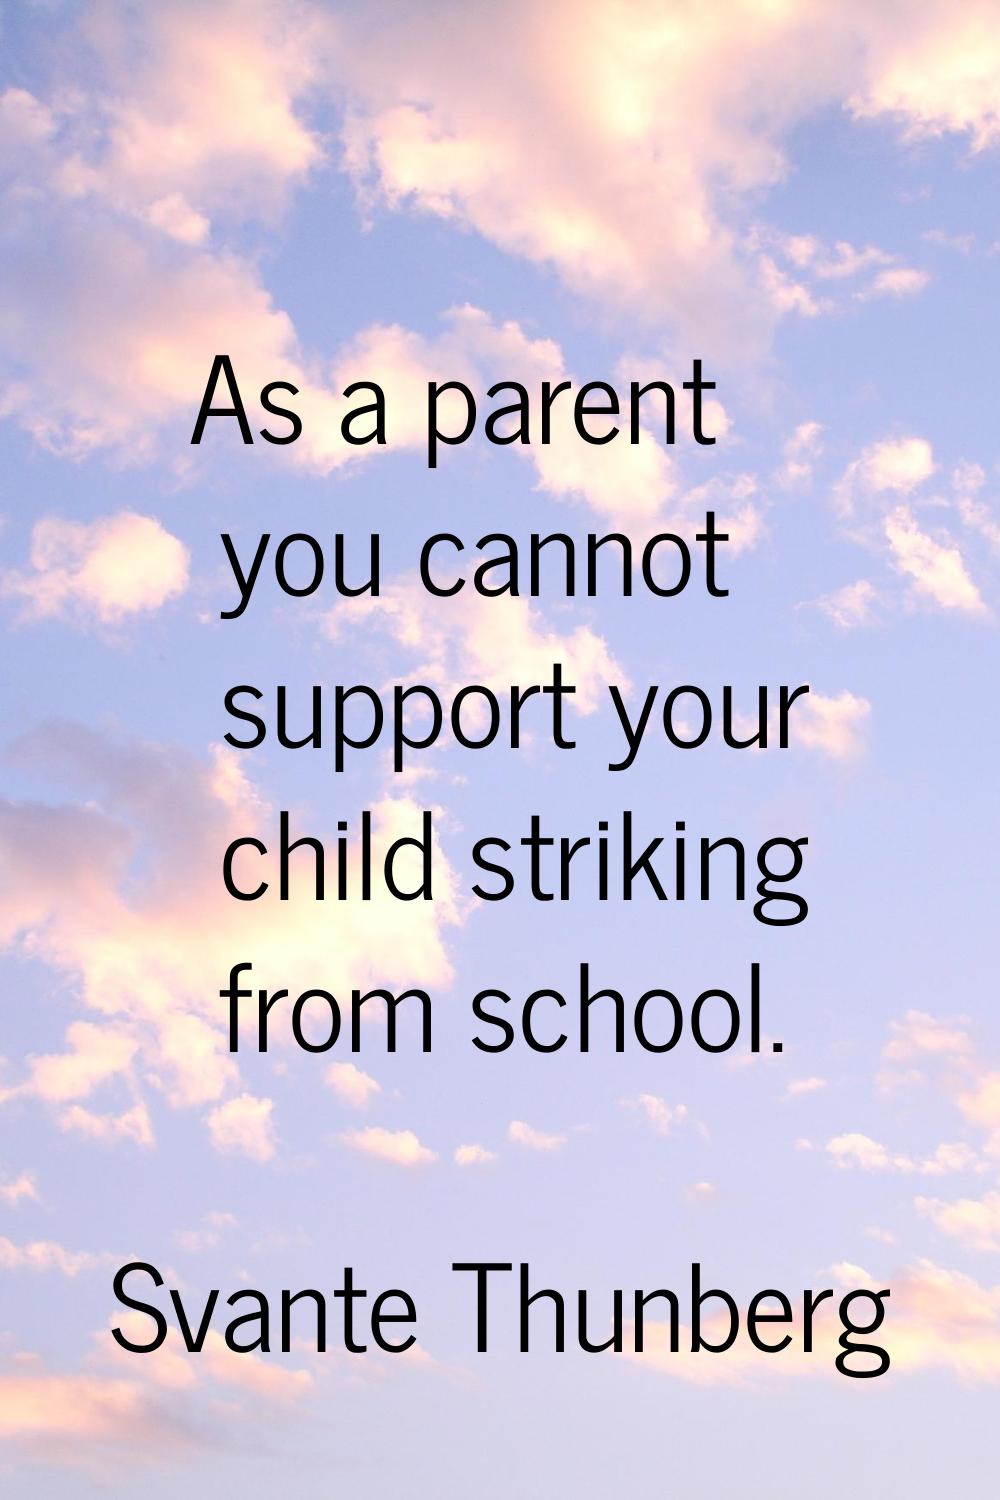 As a parent you cannot support your child striking from school.